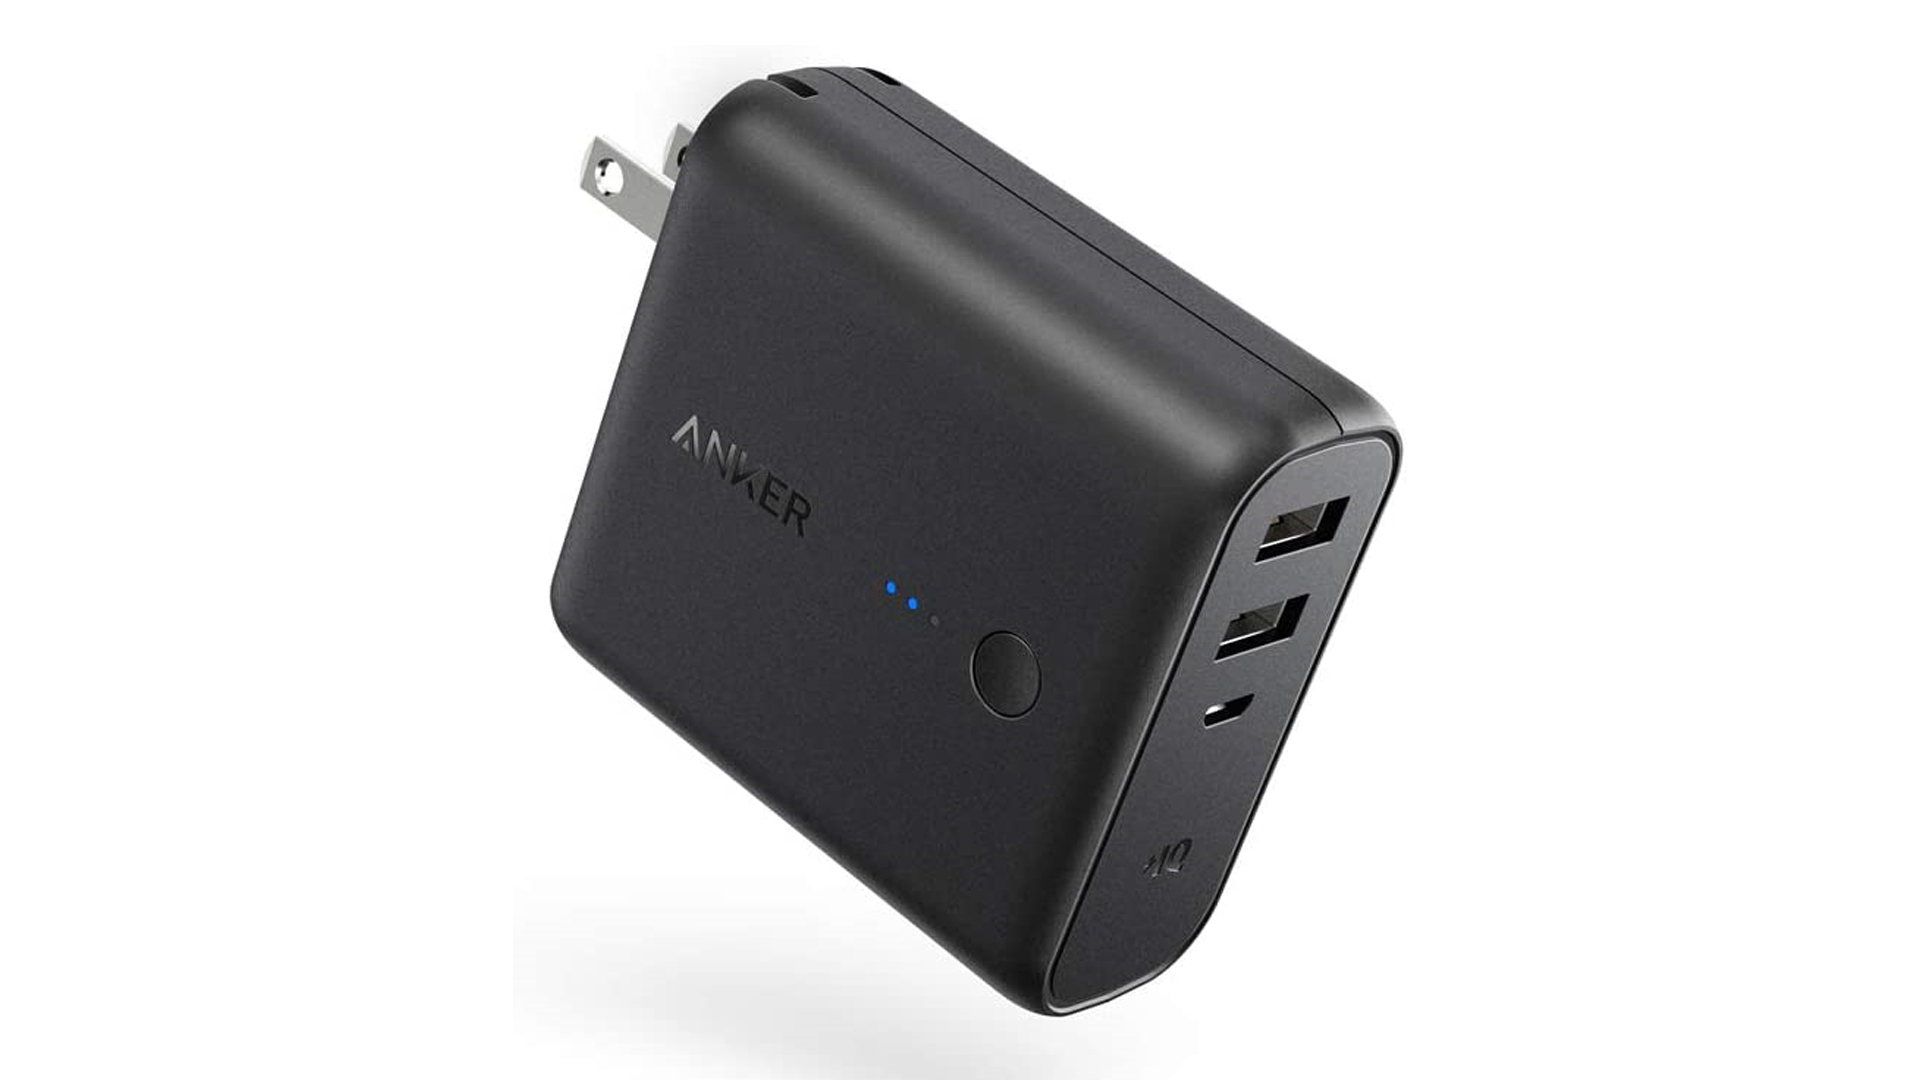 The Anker PowerCore Fusion 5000